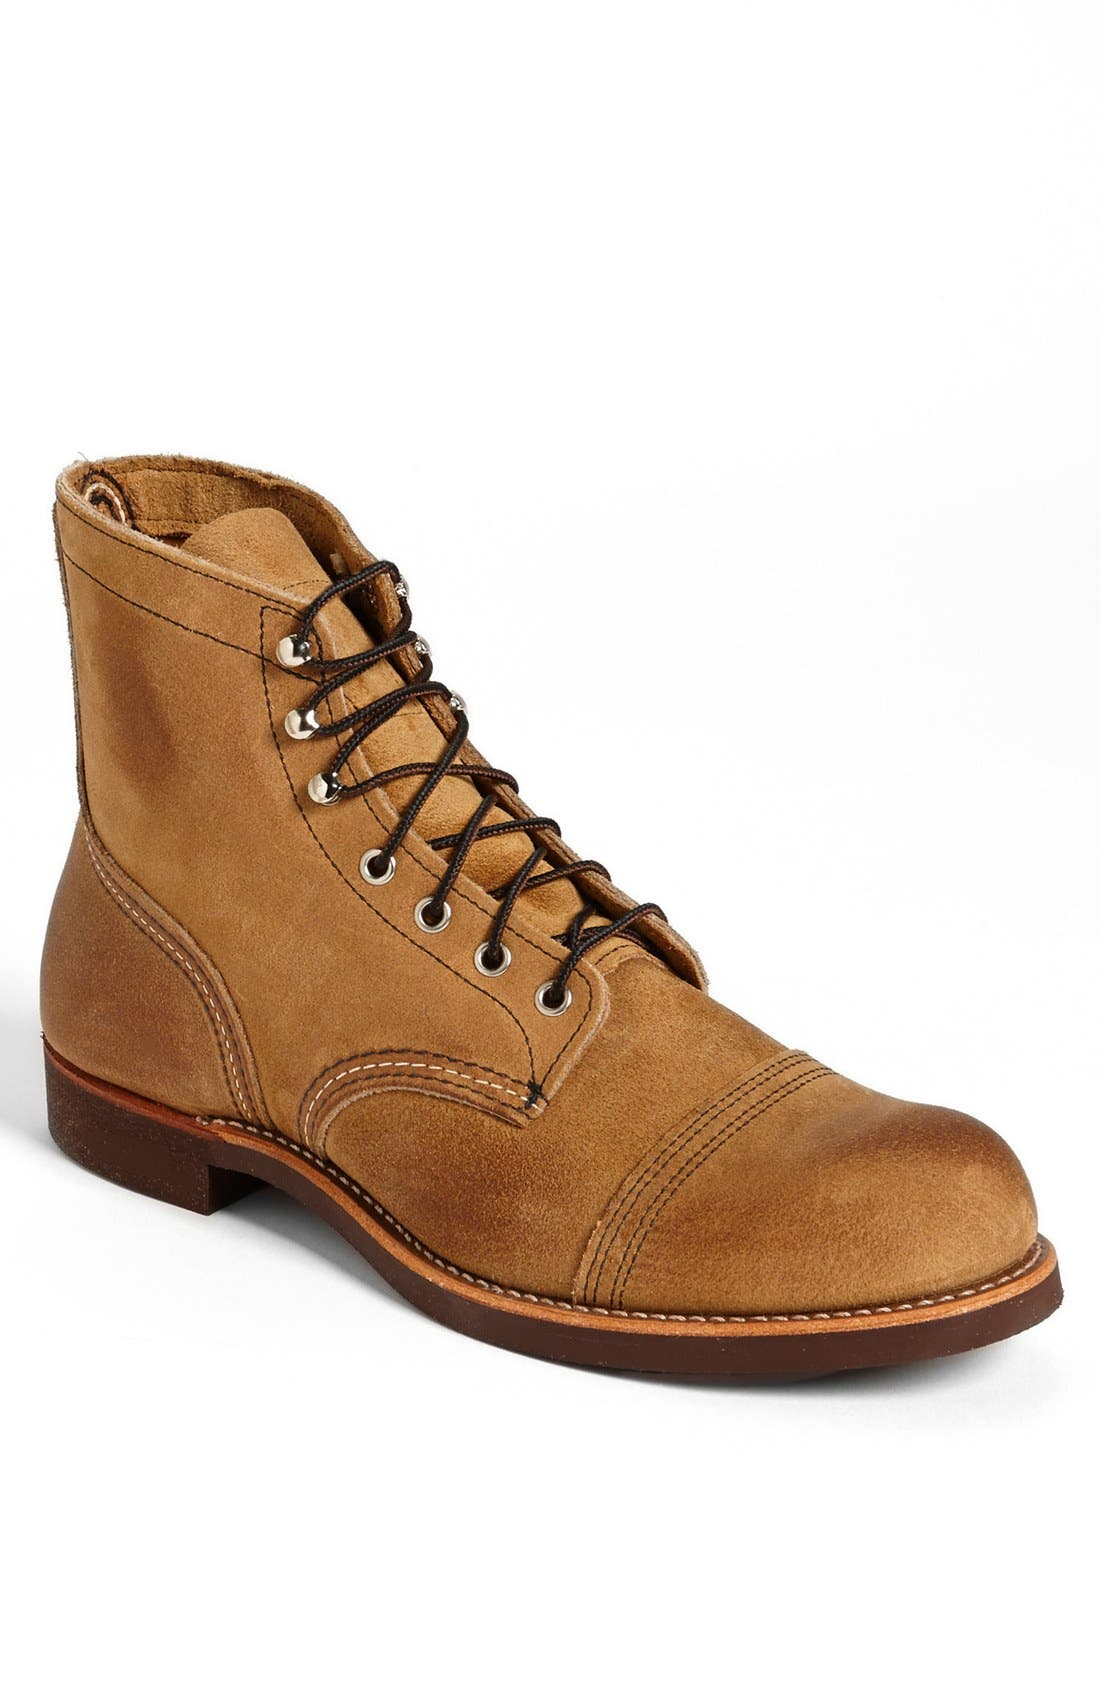 Red Wing 'Iron Ranger' 6 Inch Cap Toe 